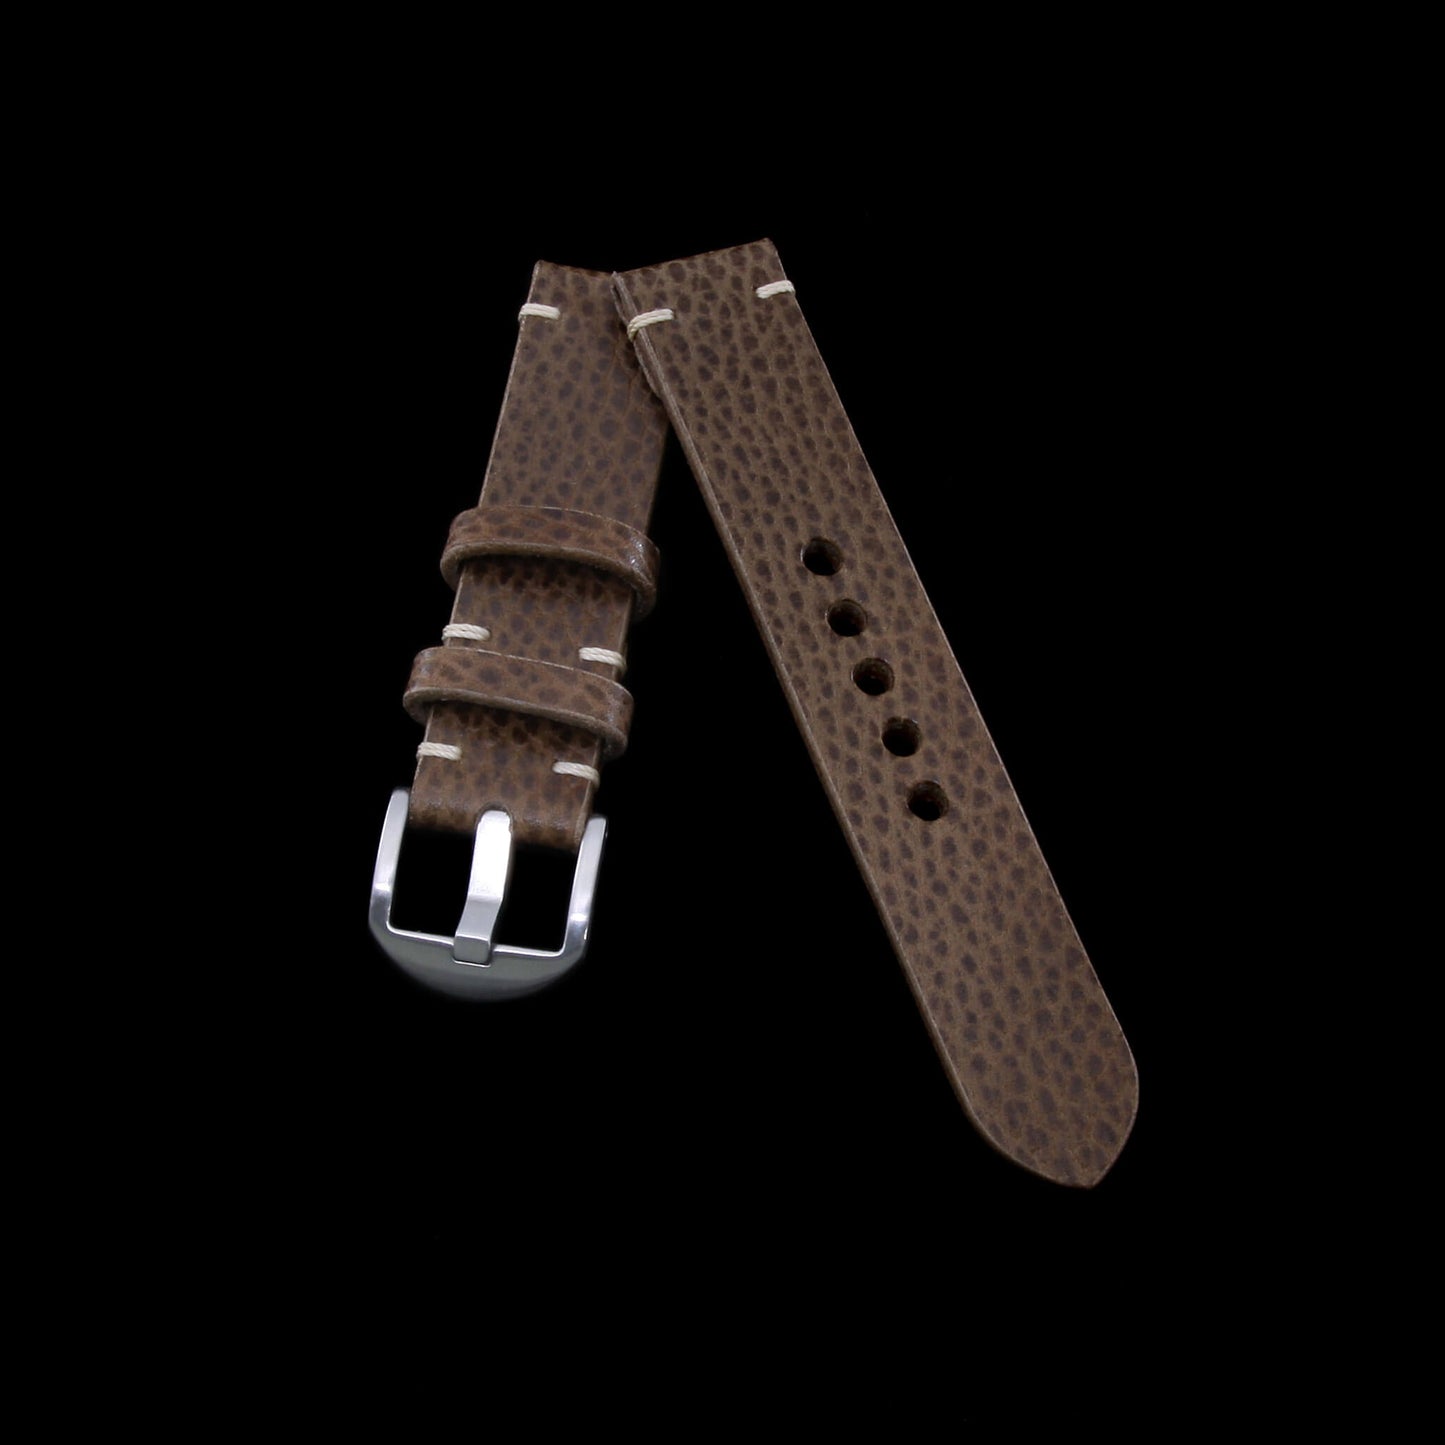 2-Piece Minimalist Leather Watch Strap, made with Buttero Taupe full grain Italian veg-tanned leather by Cozy Handmade